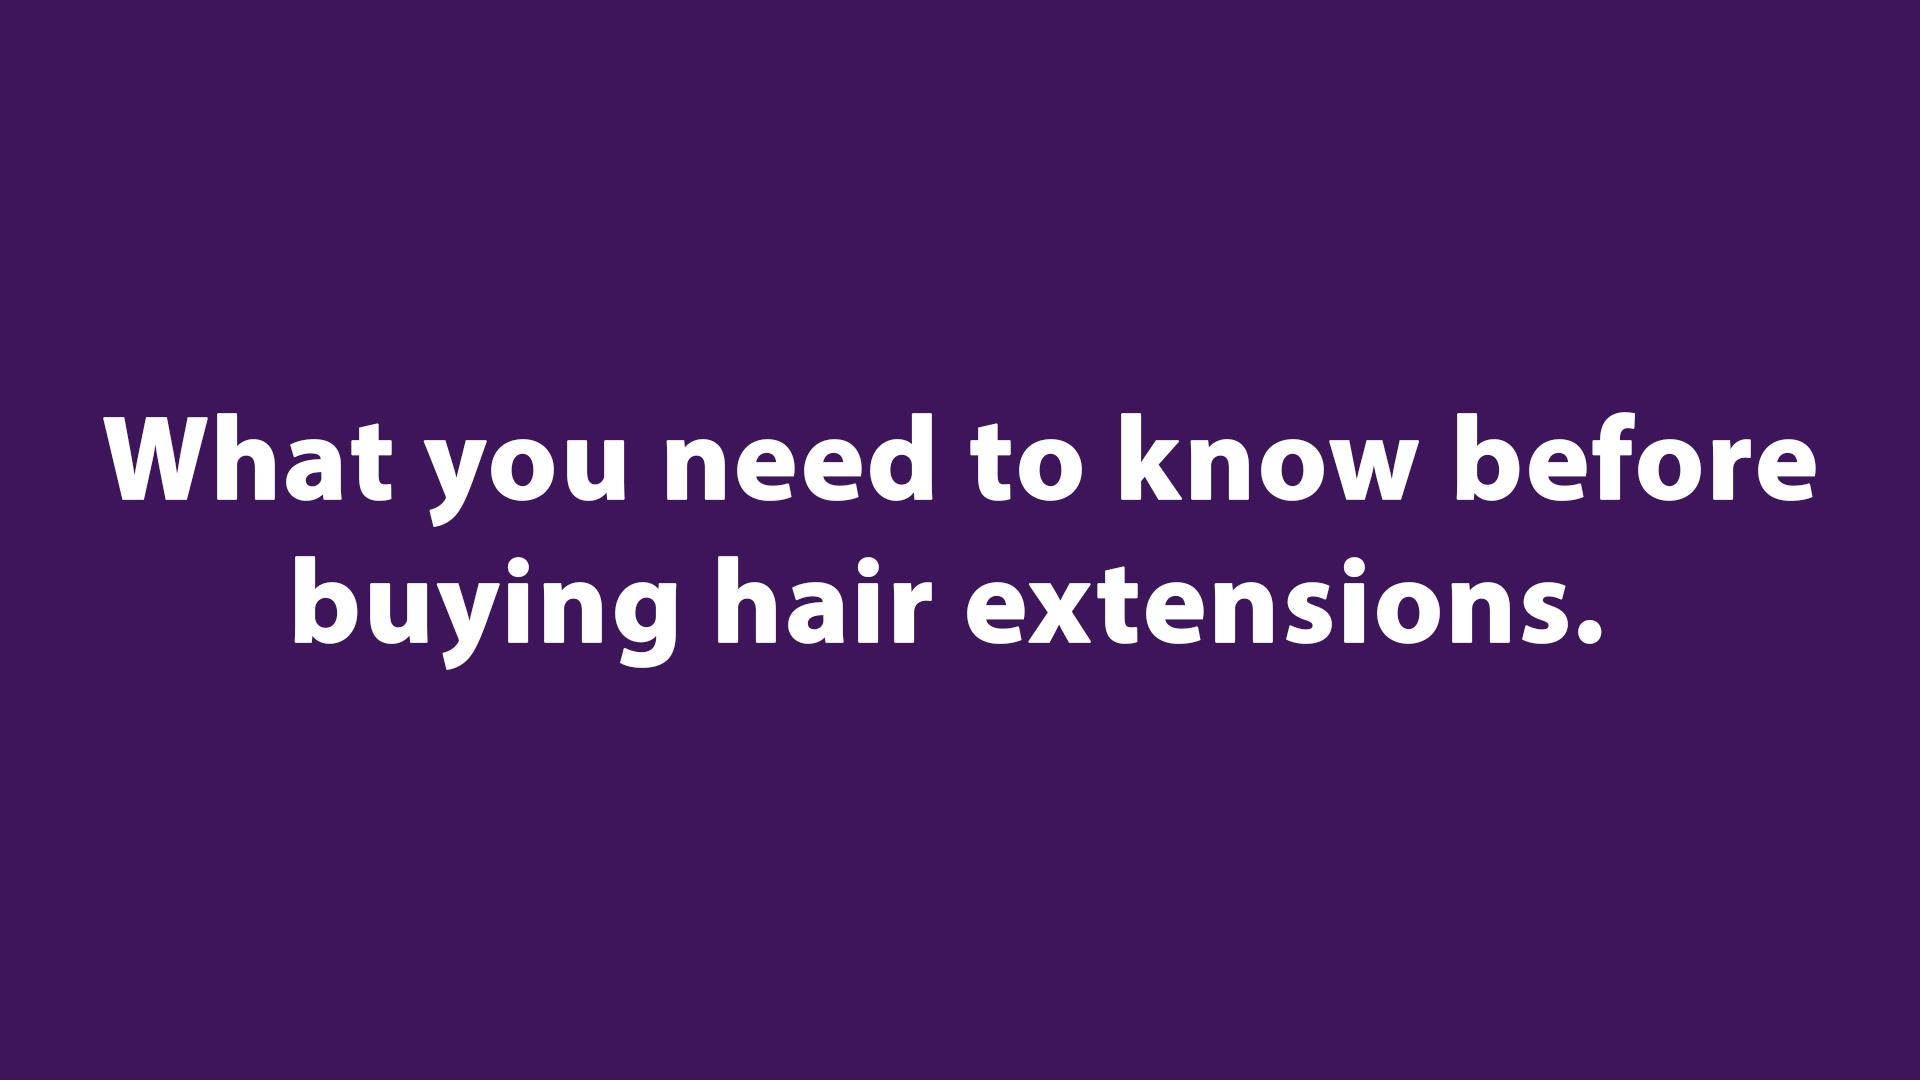 What you need to know before buying hair extensions